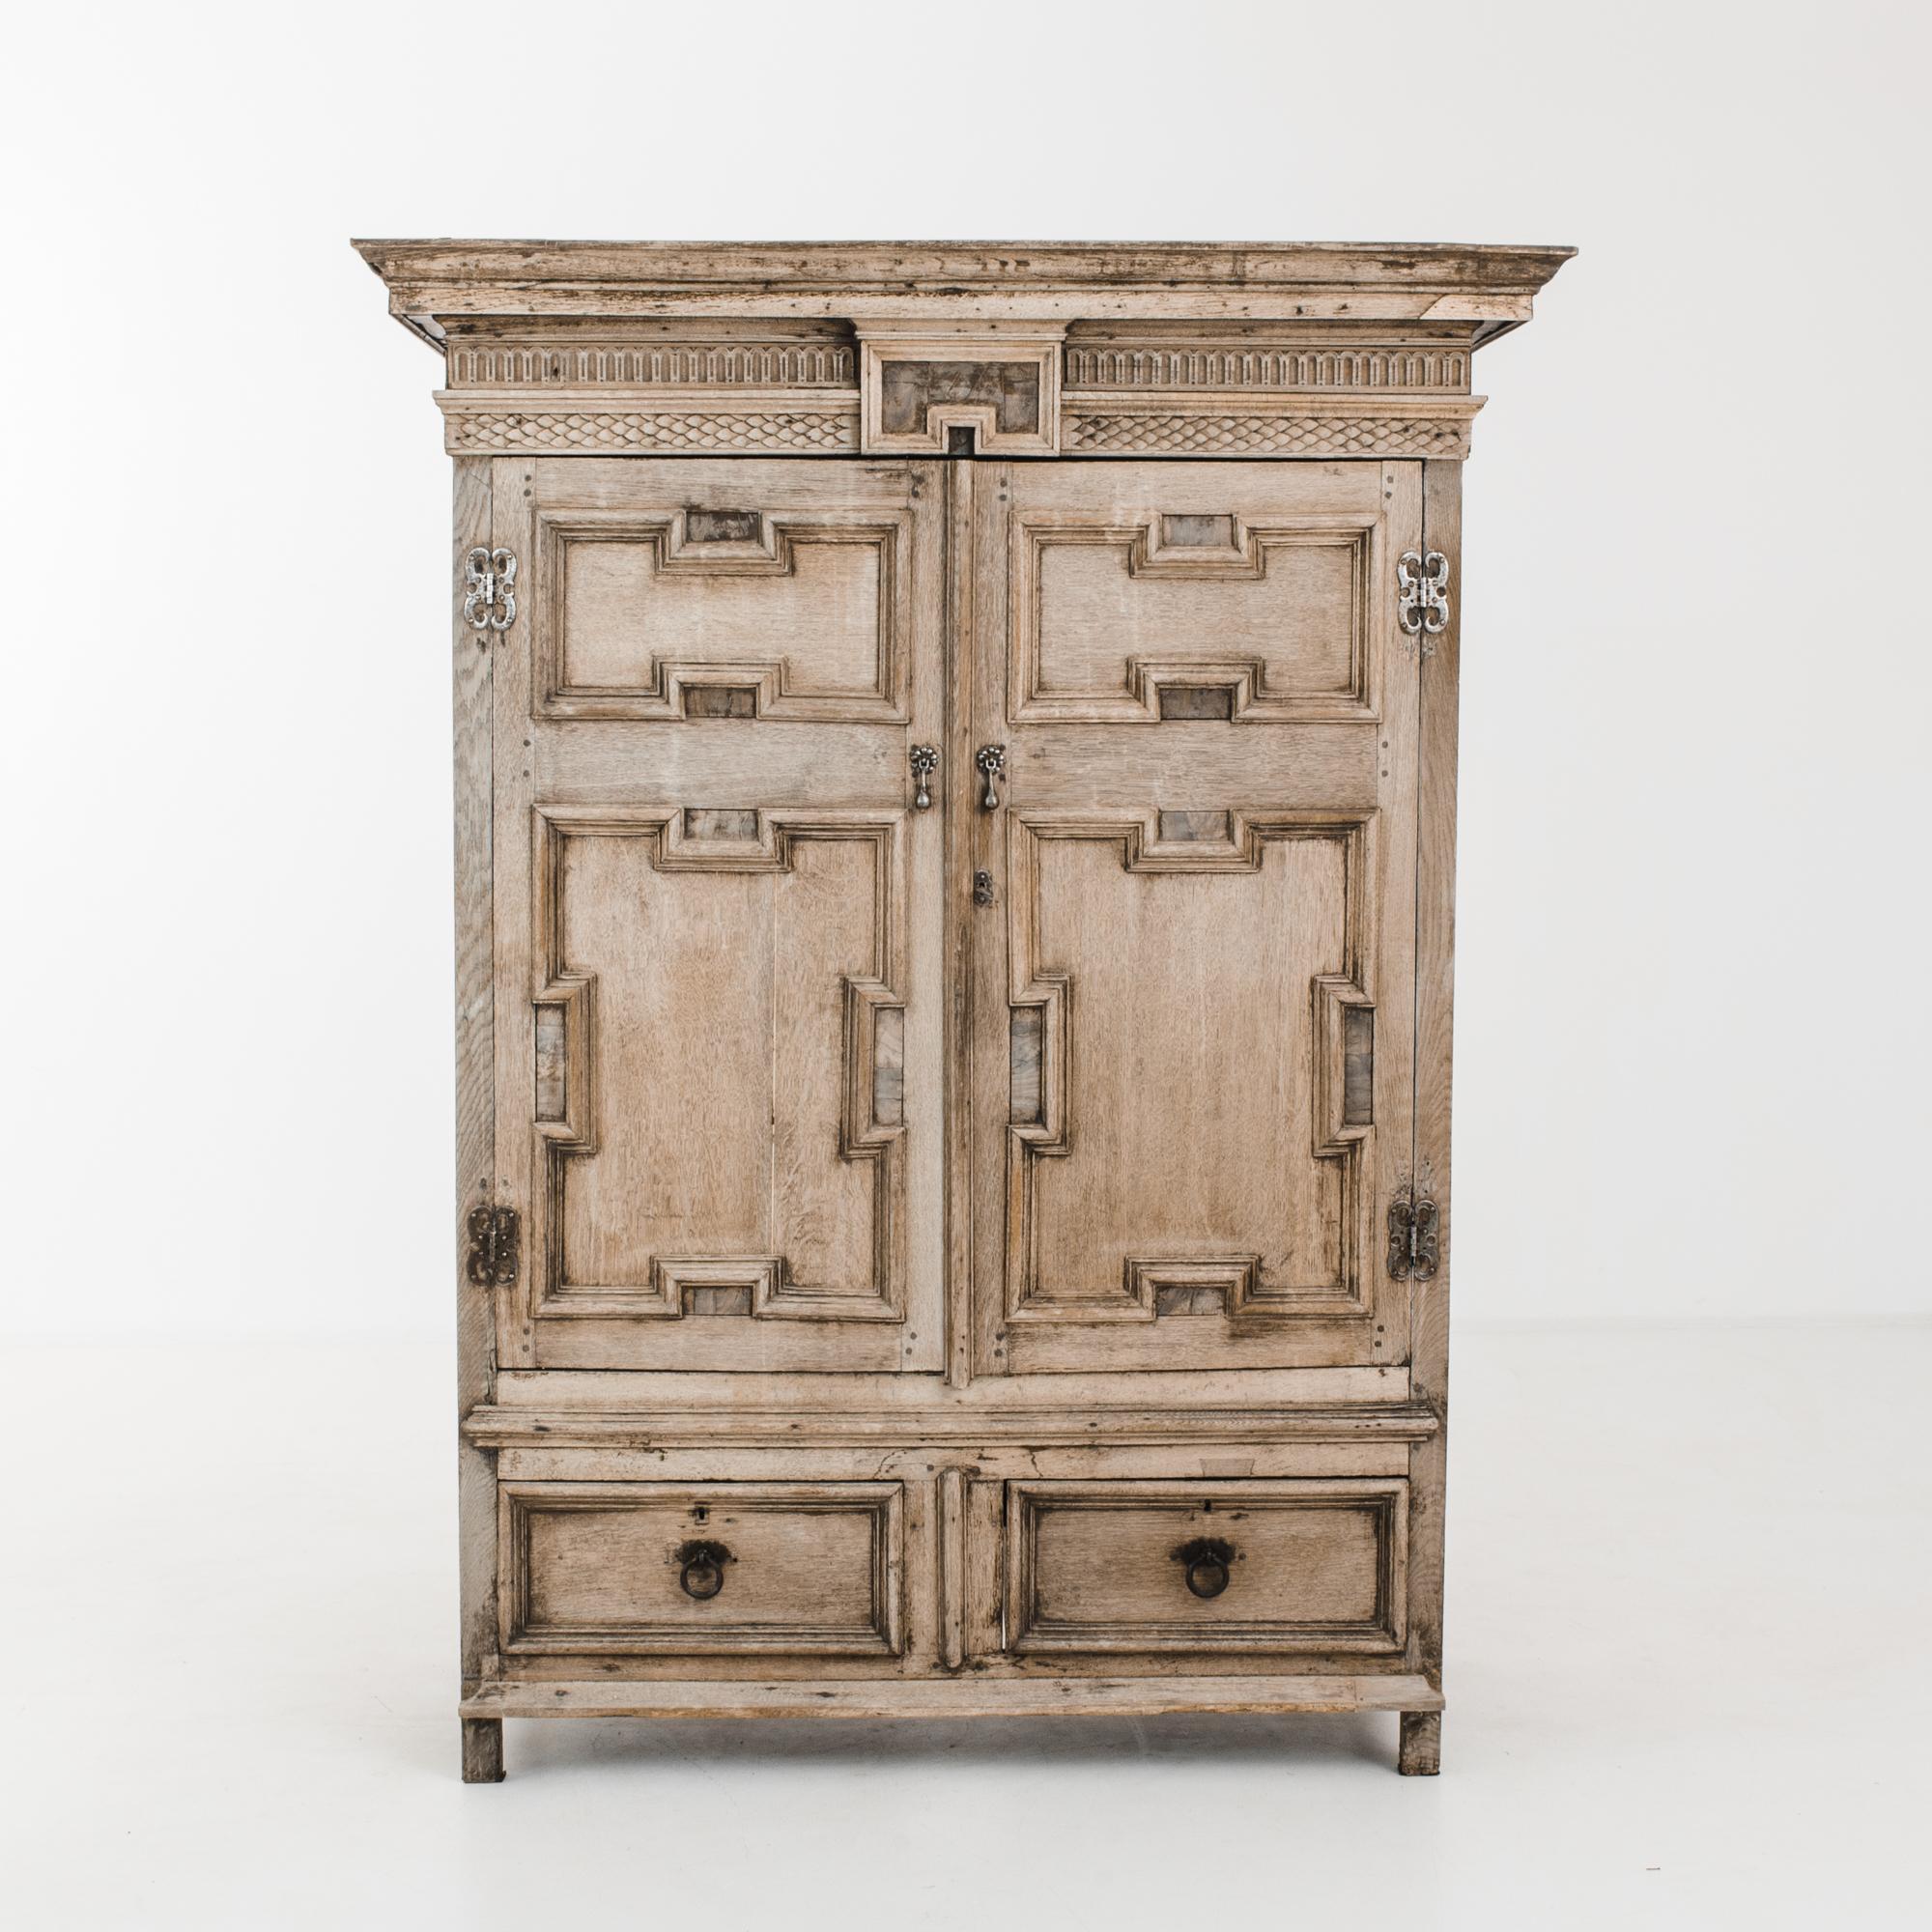 This bleached oak cabinet was made in Europe, circa 1820. Crafted by artisans, the refined carvings of arched fluting and scales below the crown molding demonstrate the skill of traditional woodworking. The cabinet features geometric paneling,